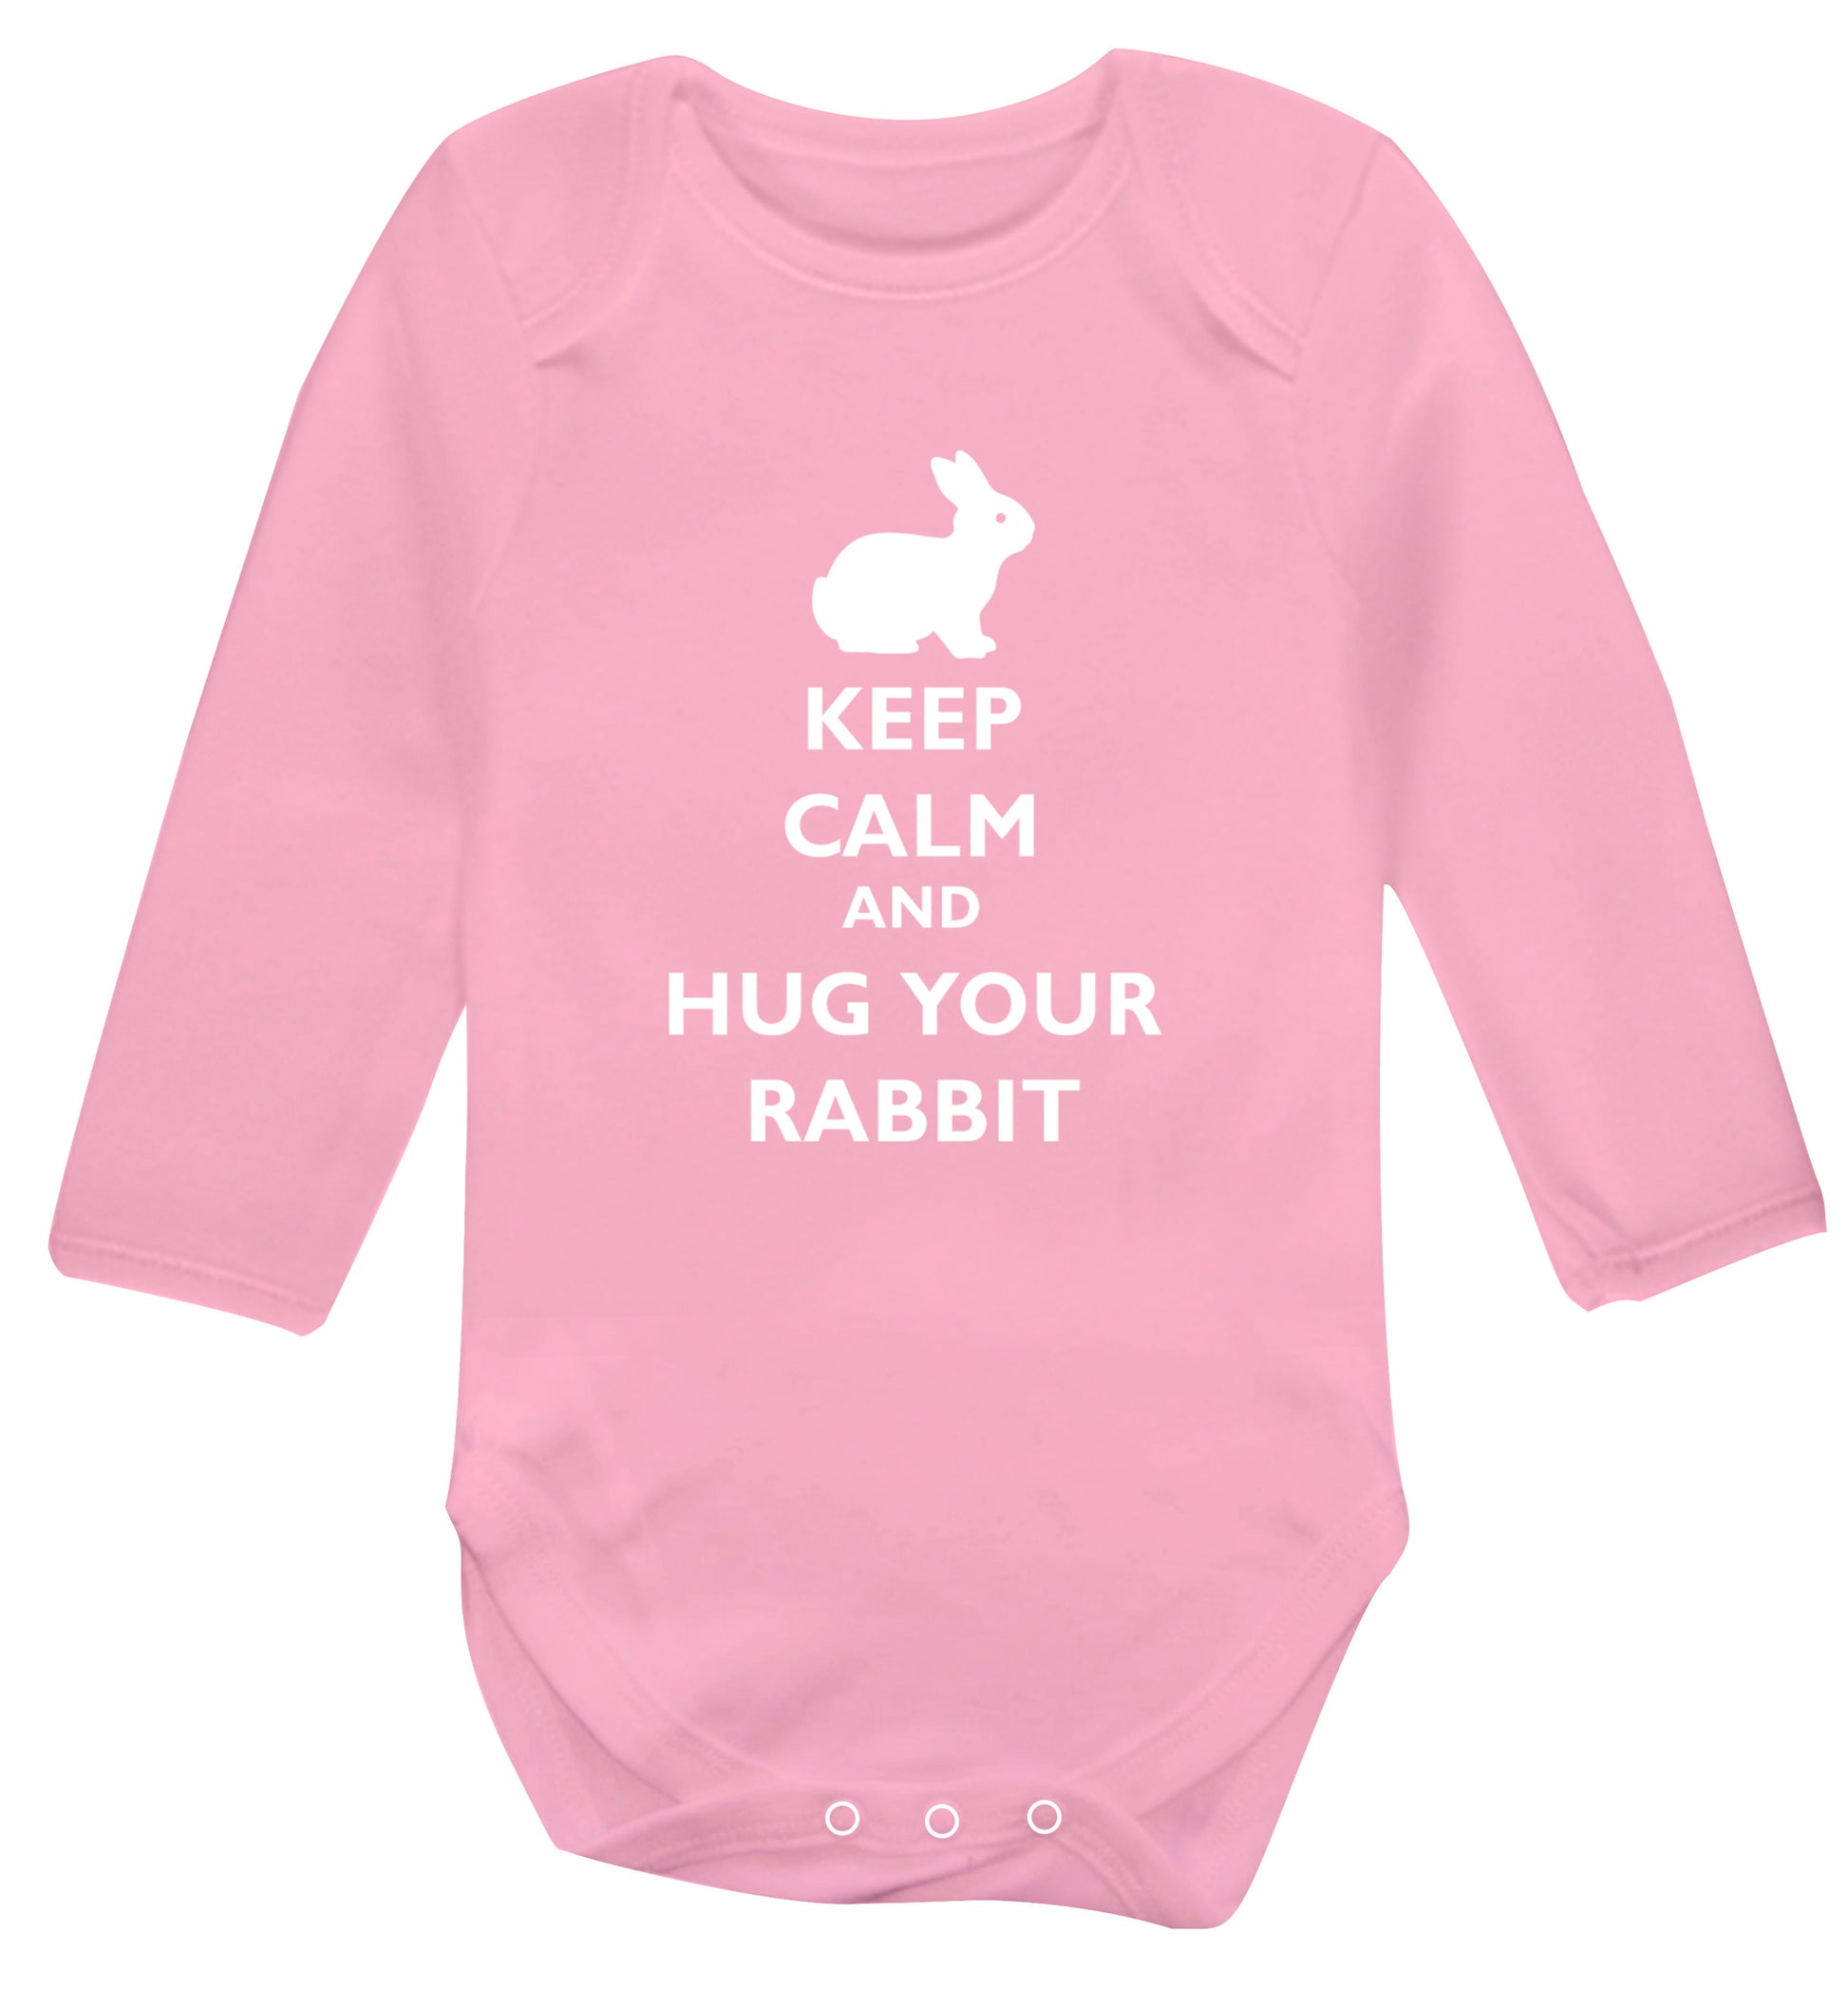 Keep calm and hug your rabbit Baby Vest long sleeved pale pink 6-12 months